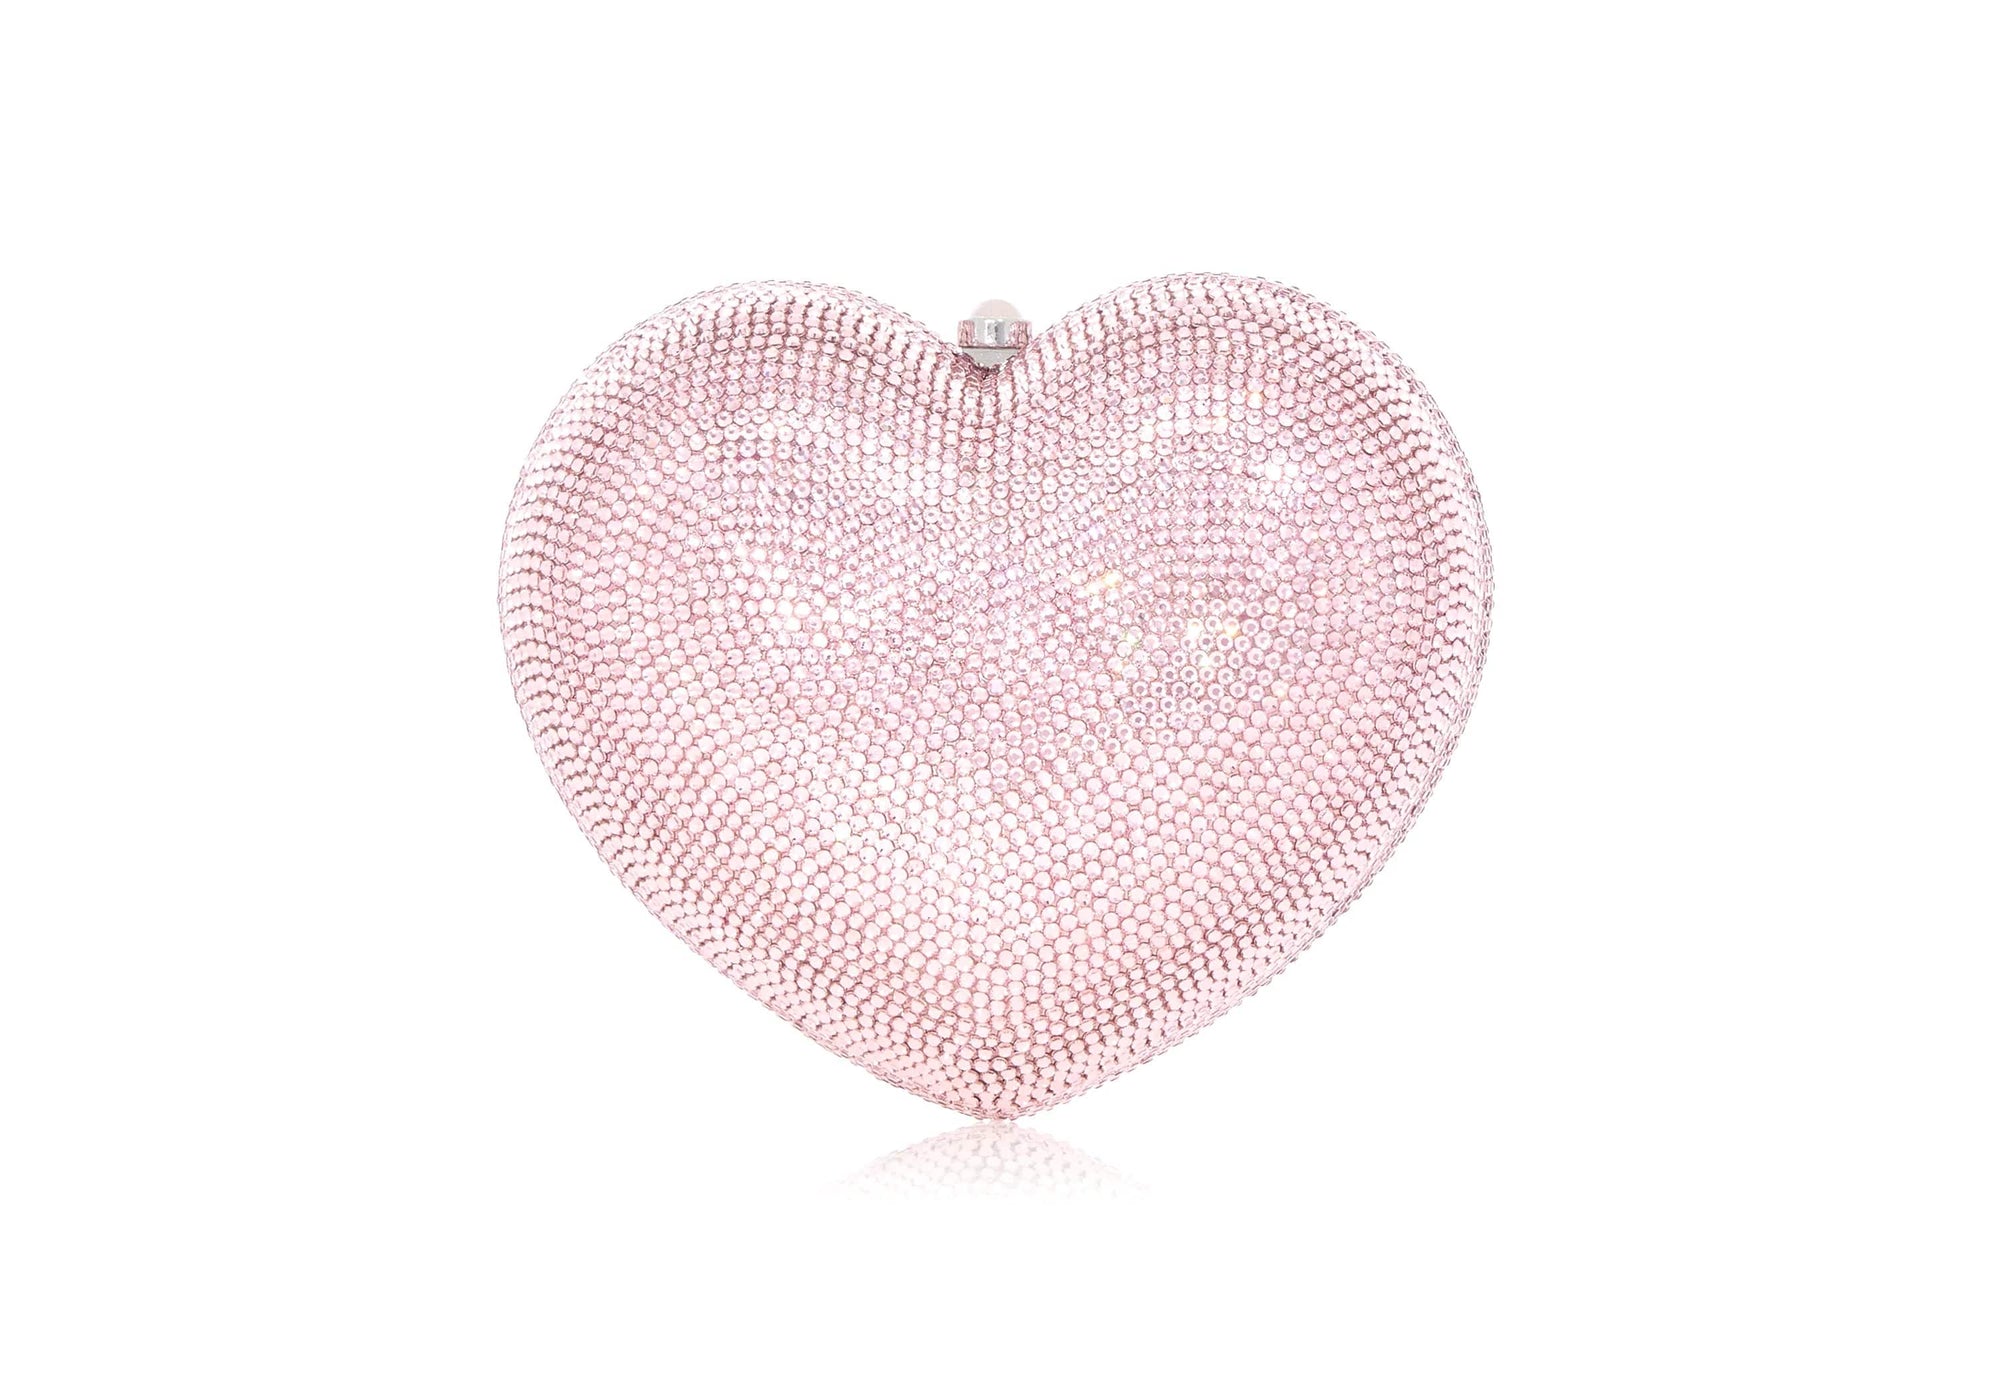 JUDITH LEIBER COUTURE - Rose Romance crystal-embellished brass clutch bag